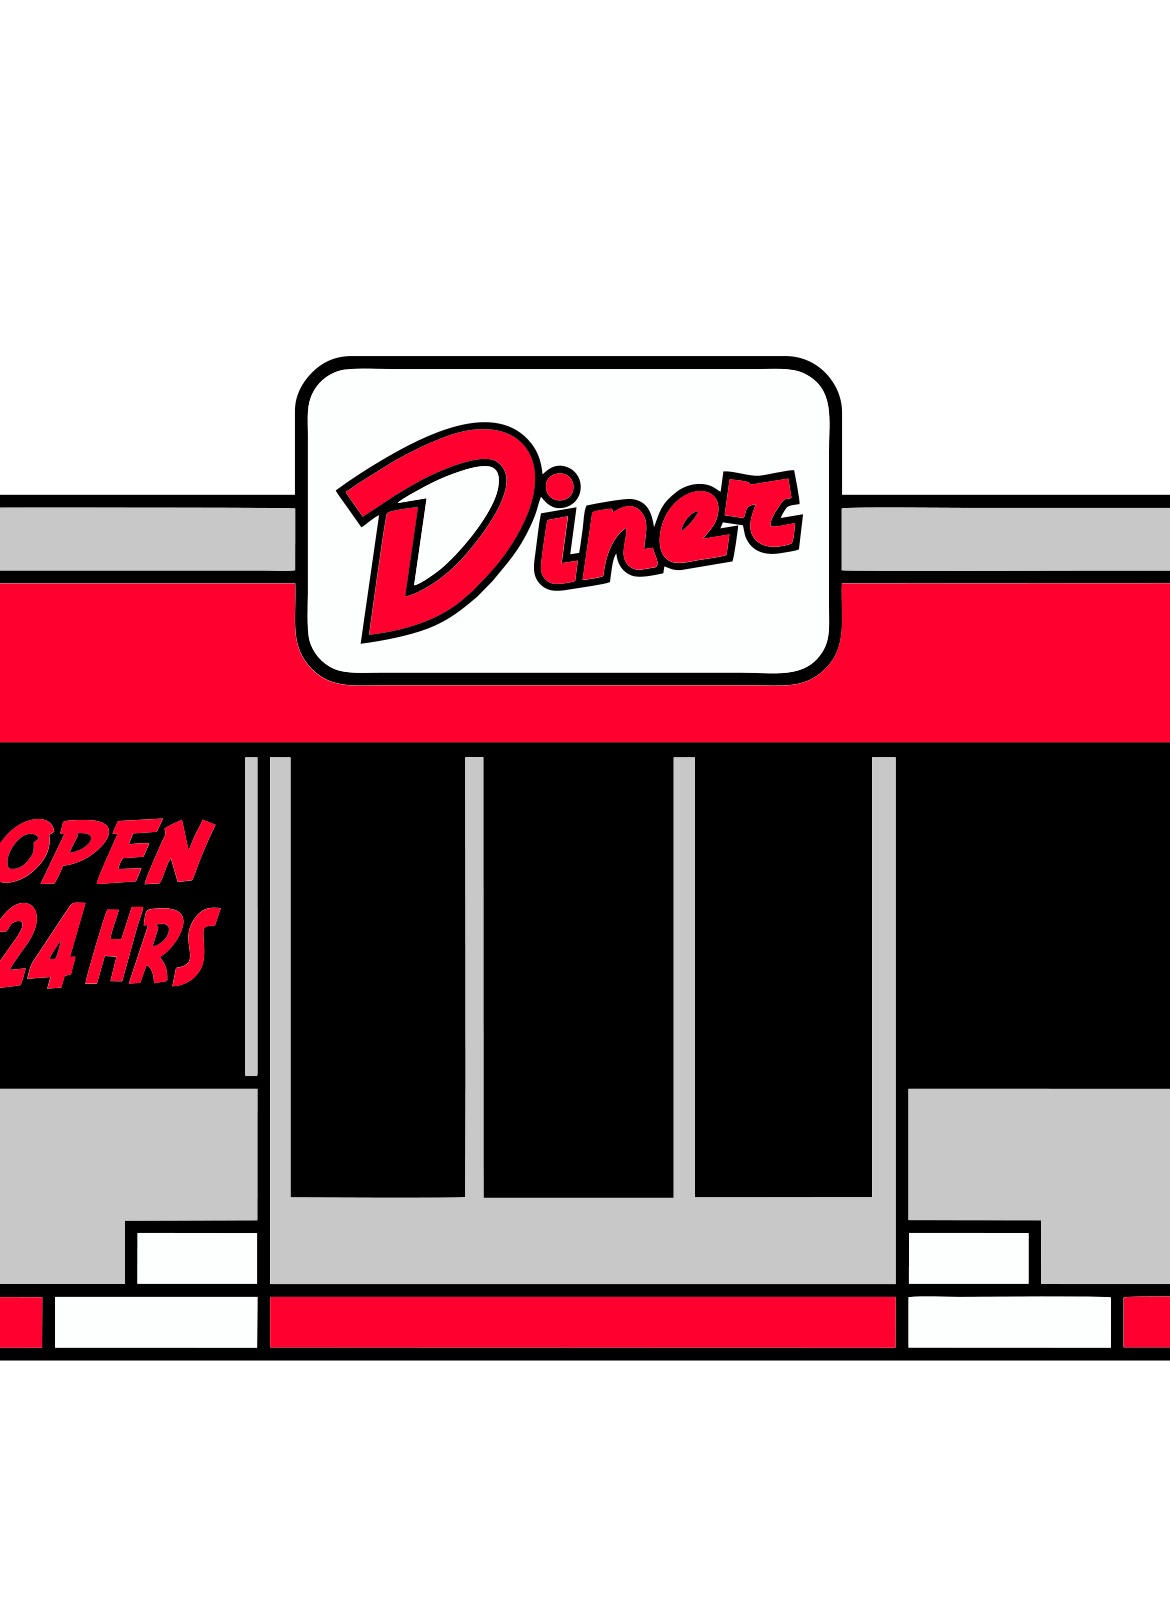 Drawing of a diner free image download